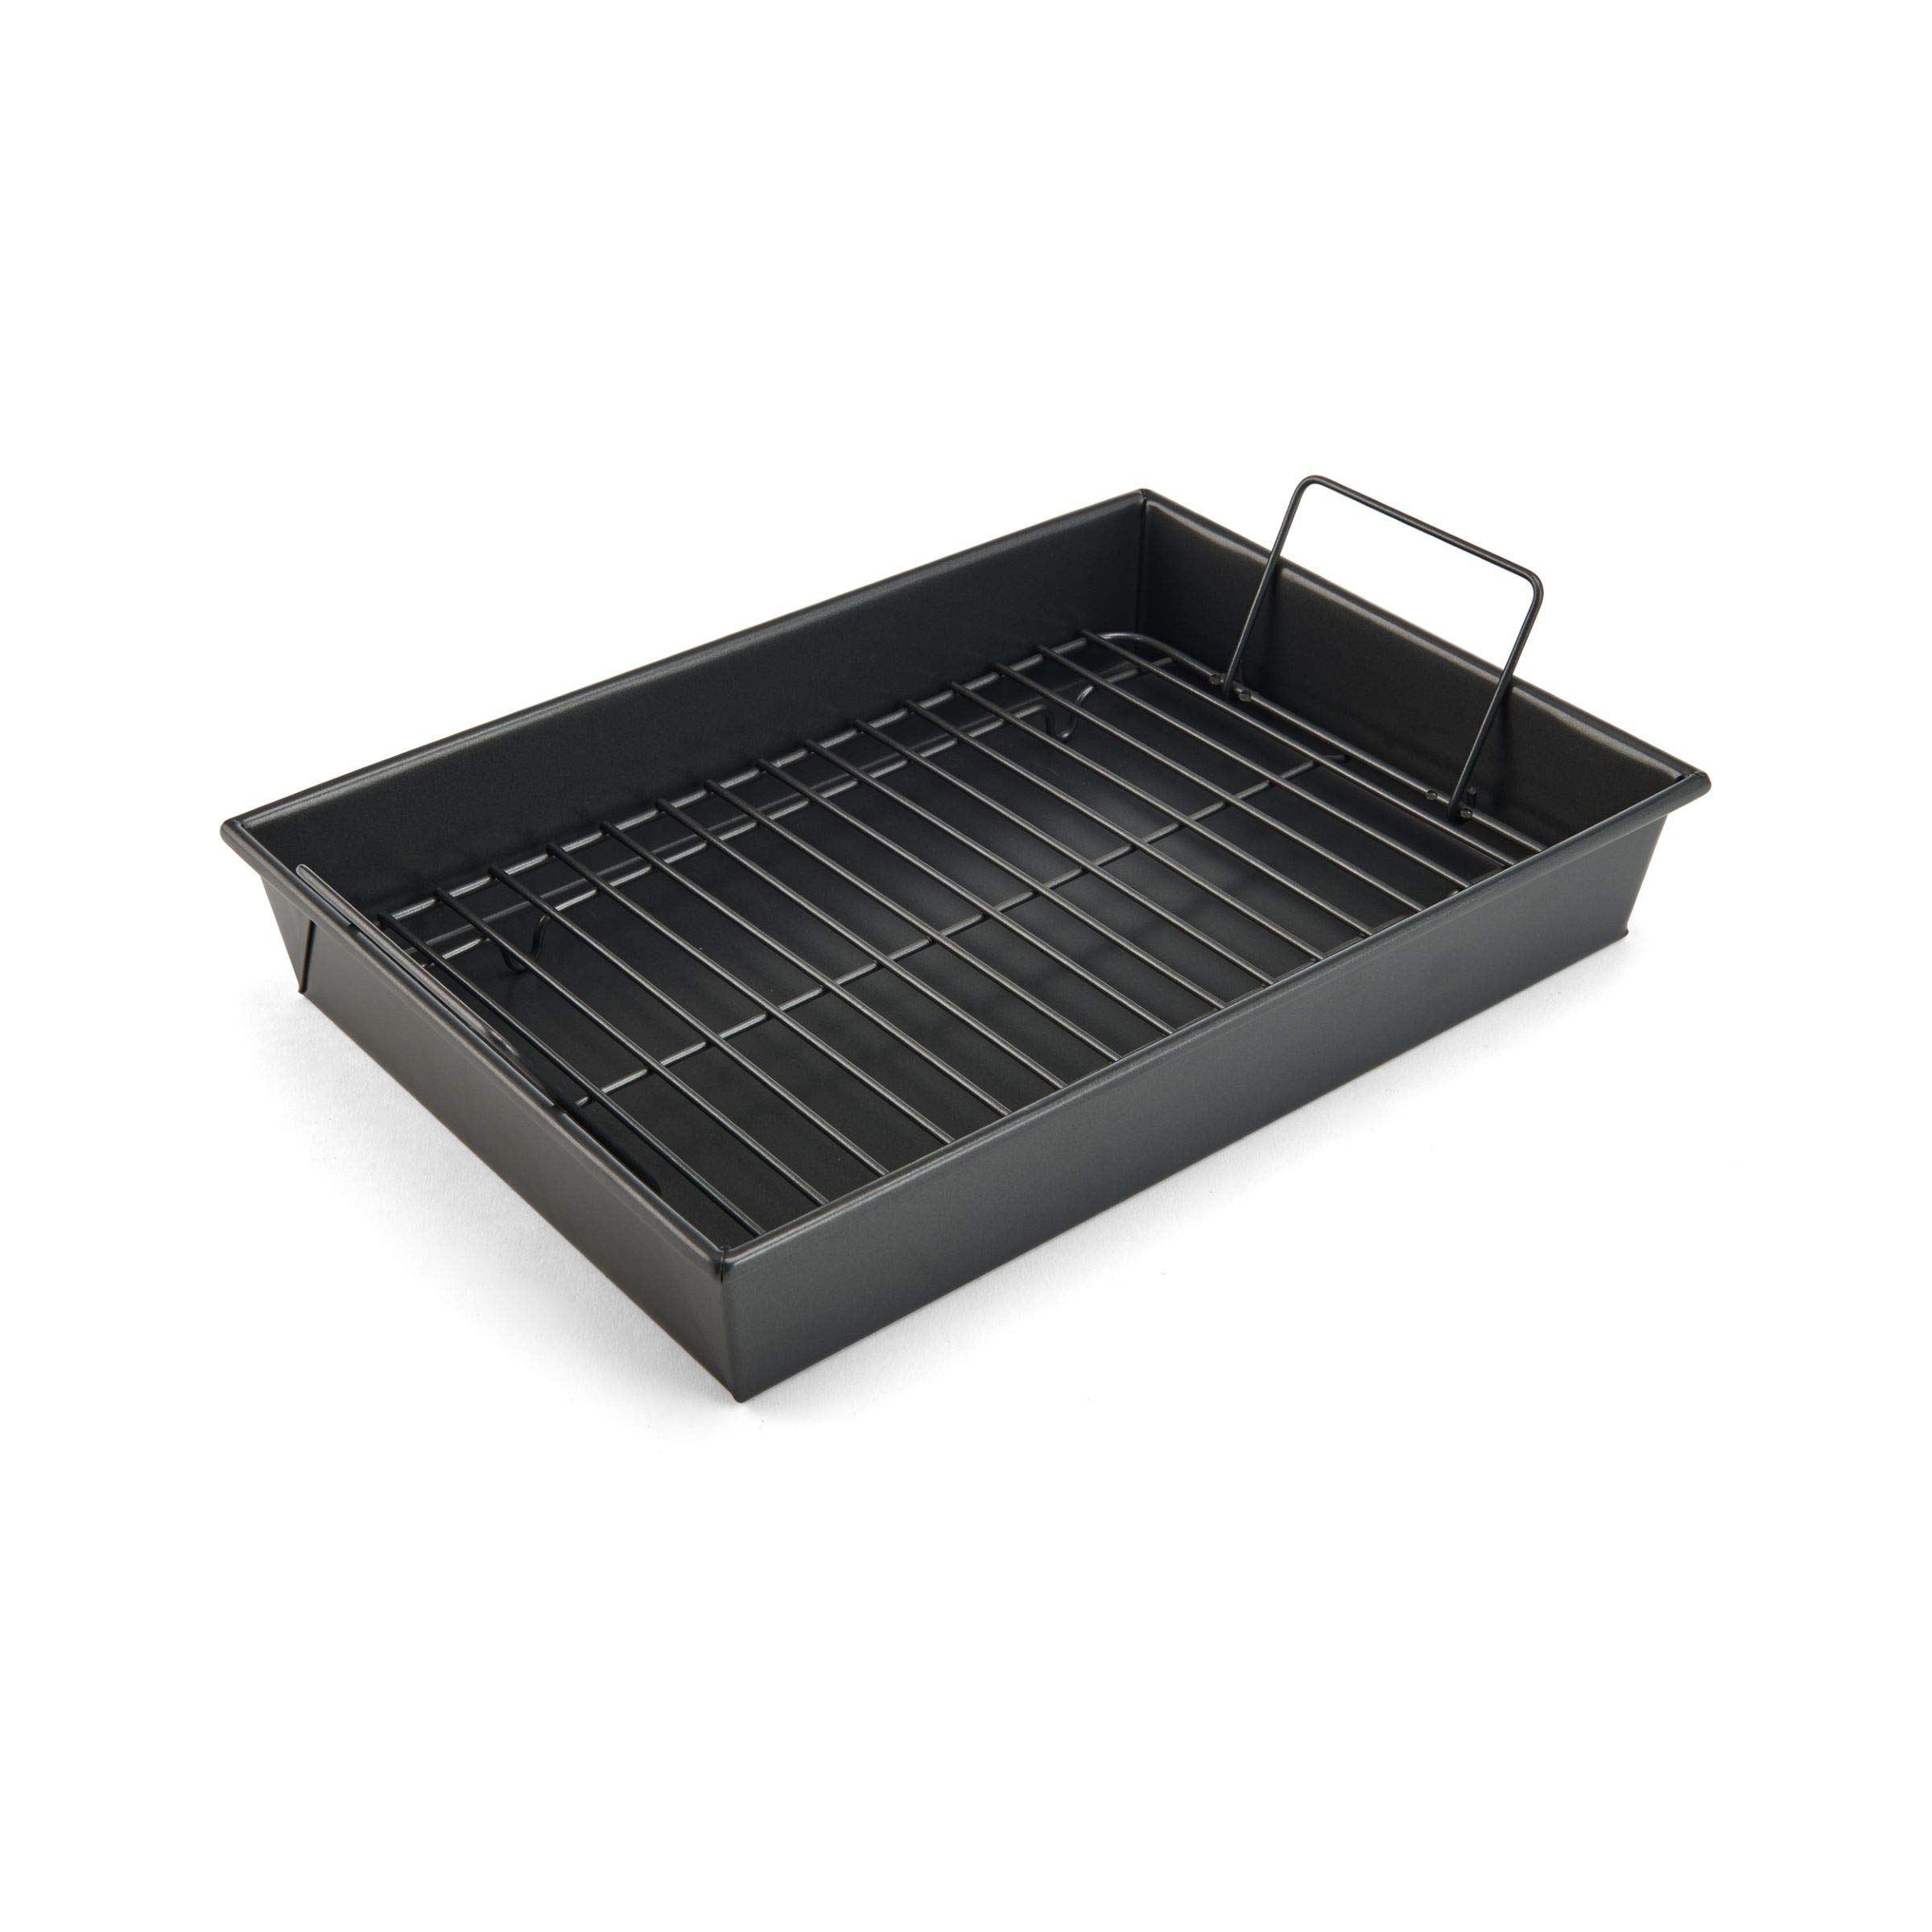 Chicago Metallic Pro Non-Stick Roast and Broil Baking Pan with Rack, 13-Inch-by-9-Inch, Dark Gray